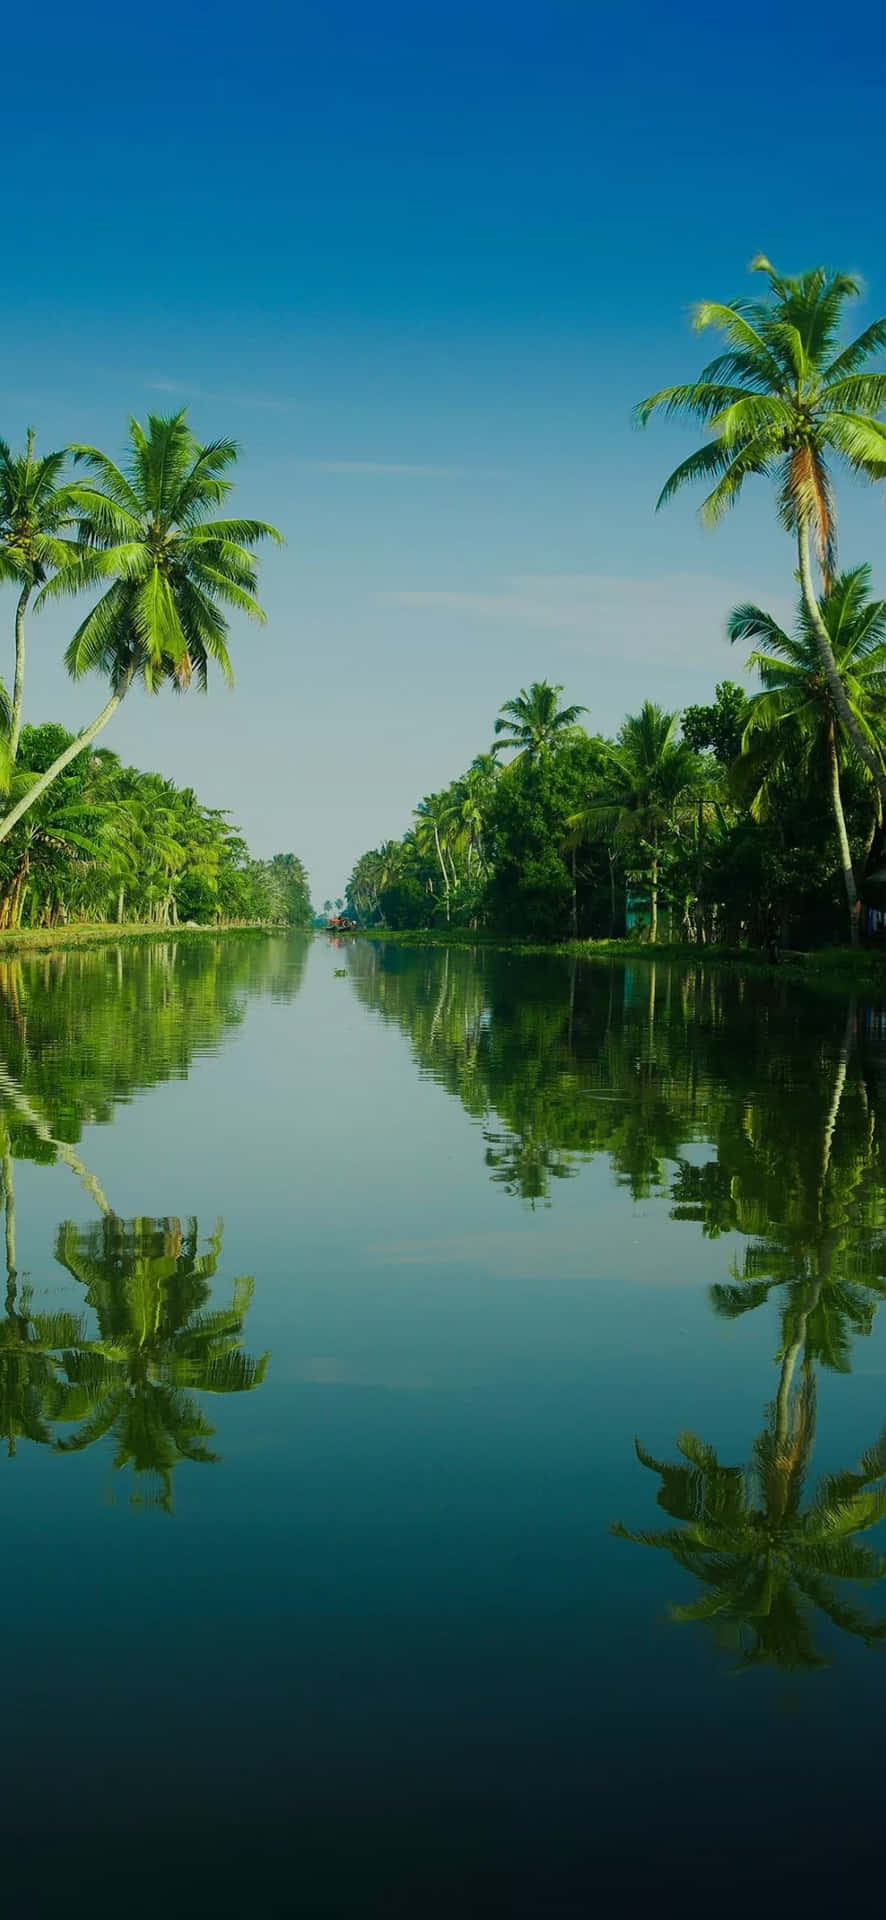 Enjoy the beauty of nature in the stunning state of Kerala